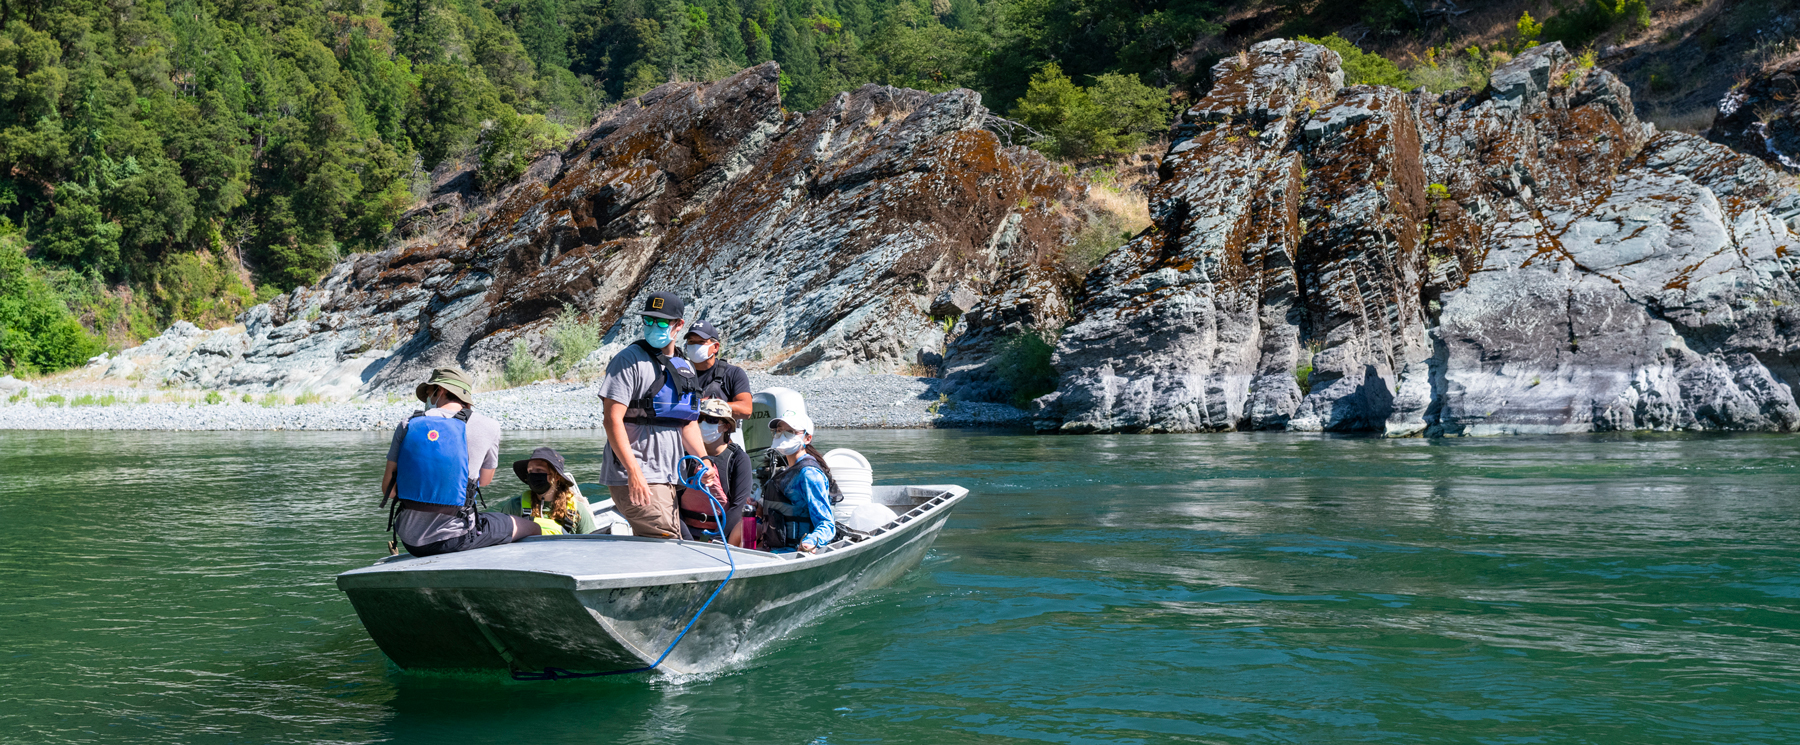 Cal Poly Humboldt students on a jet boat in the Klamath Basin.